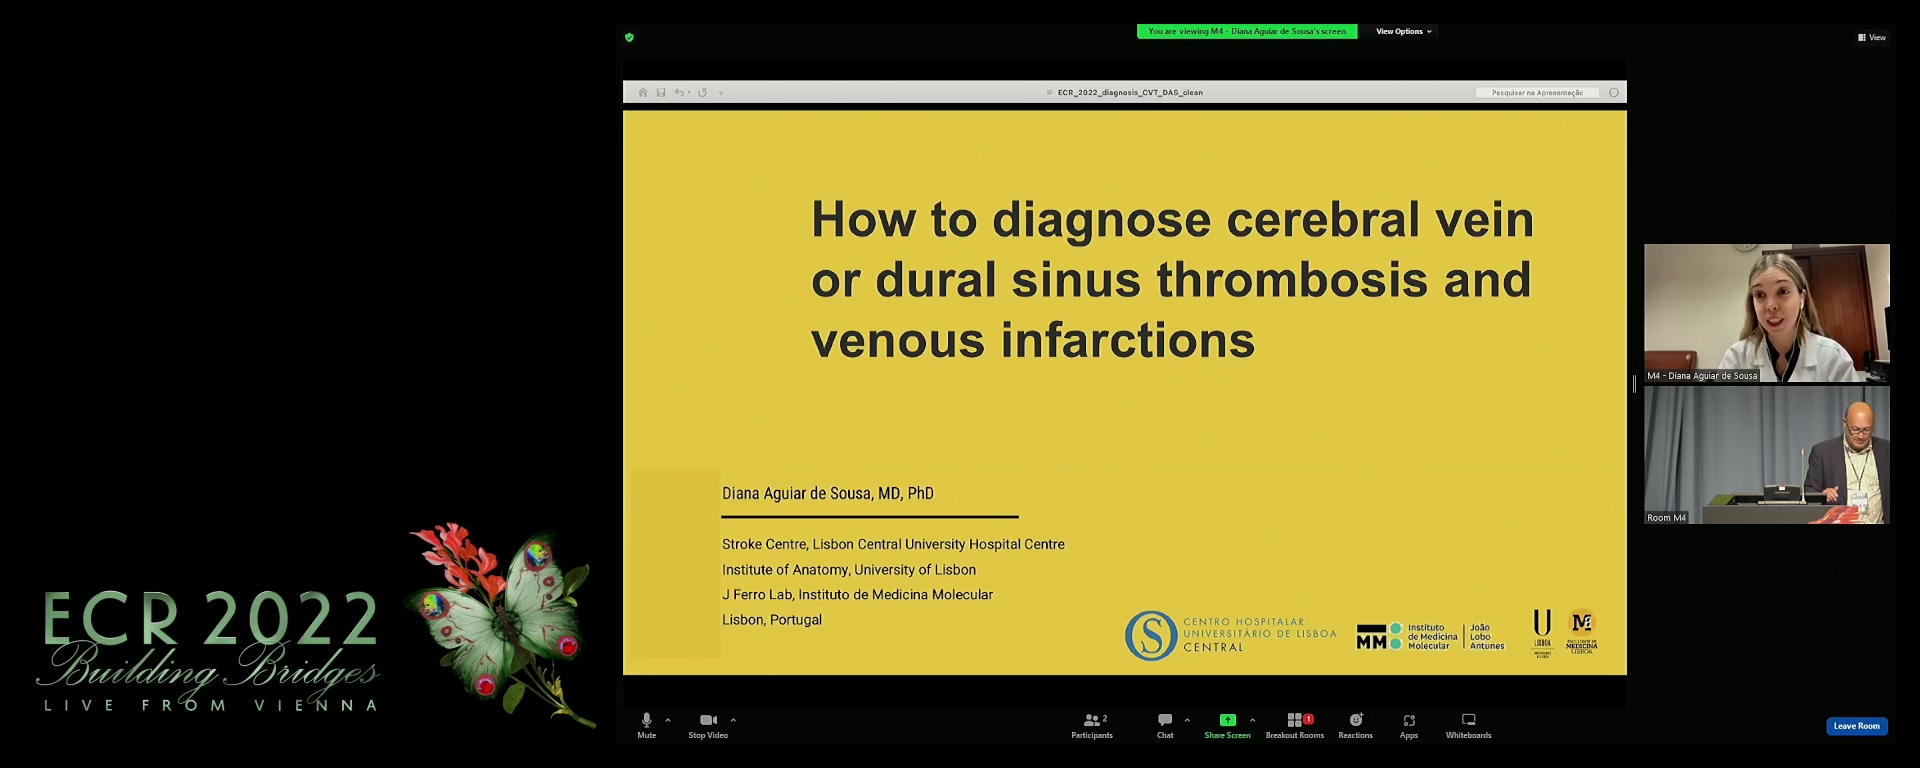 How to diagnose cerebral vein or dural sinus thrombosis and venous infarctions